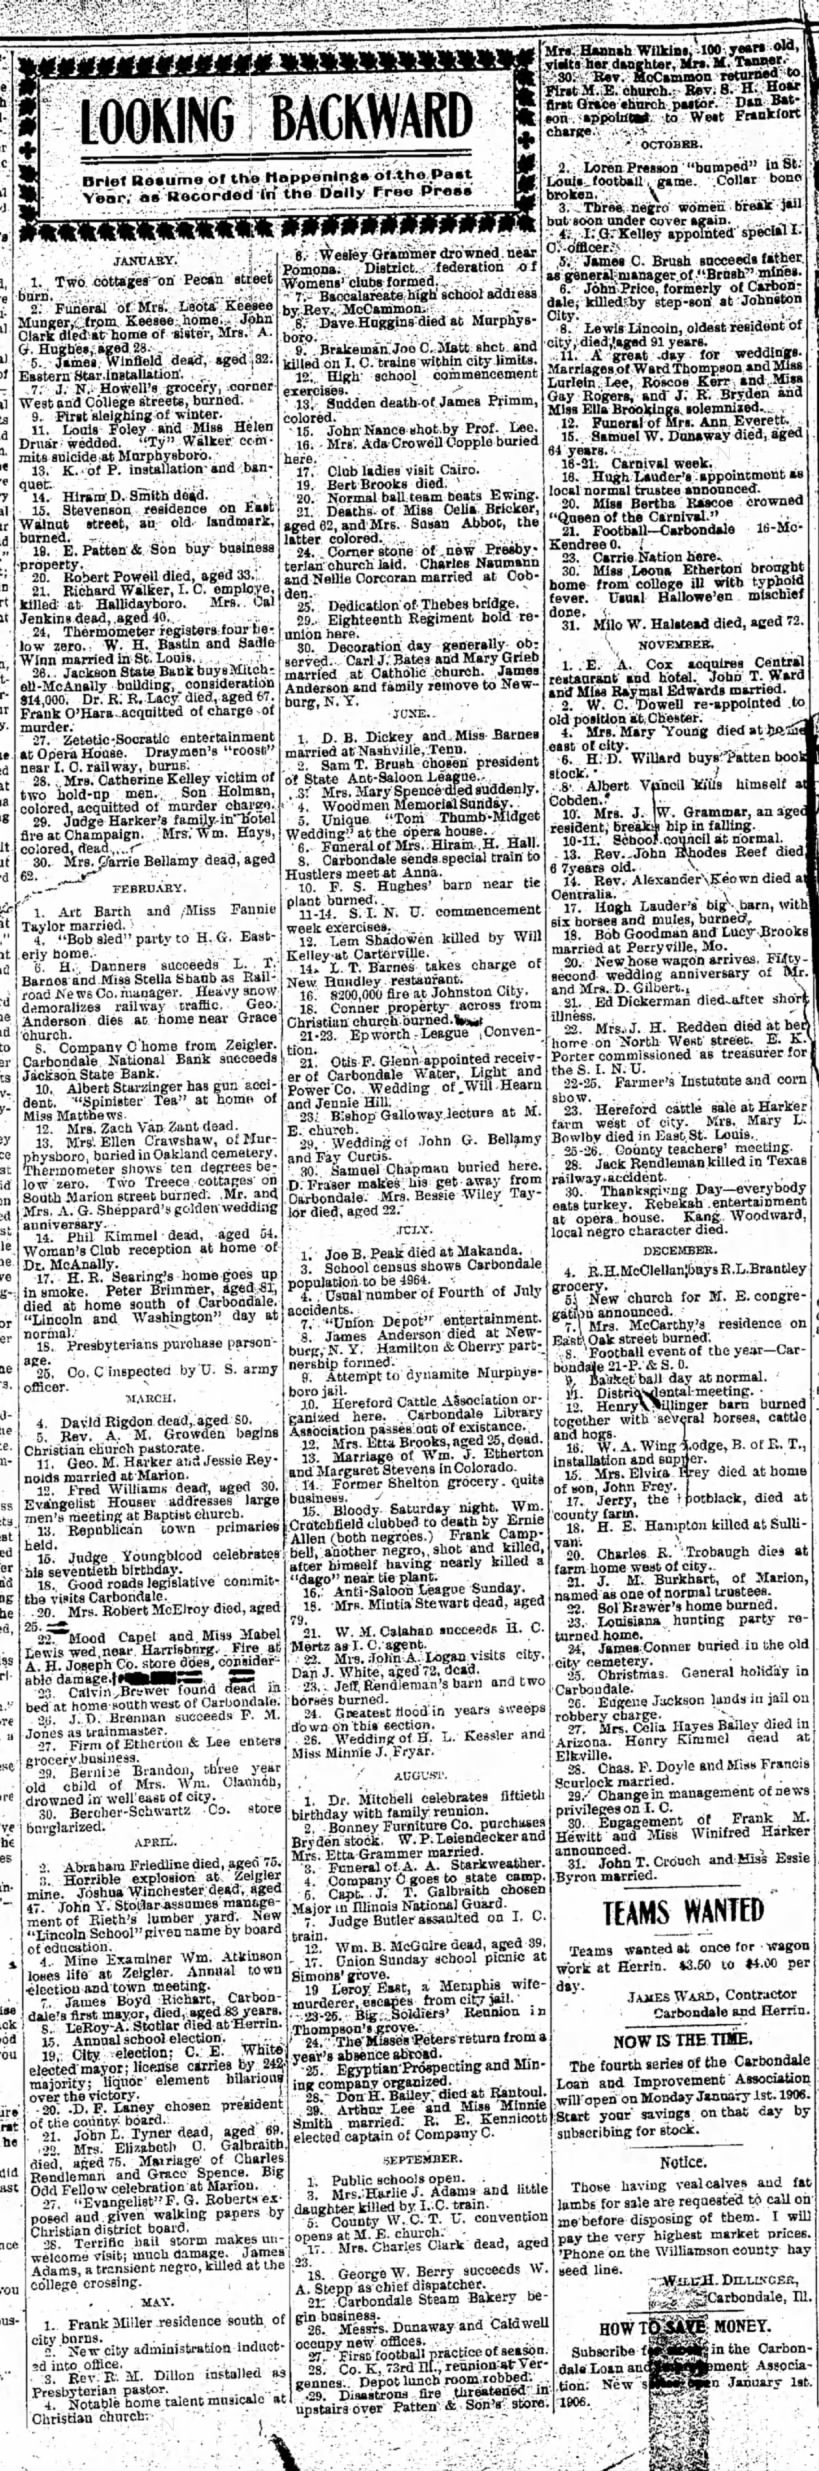 Lewis Lincoln
Daily Free Press
1 Jan 1906 p 2